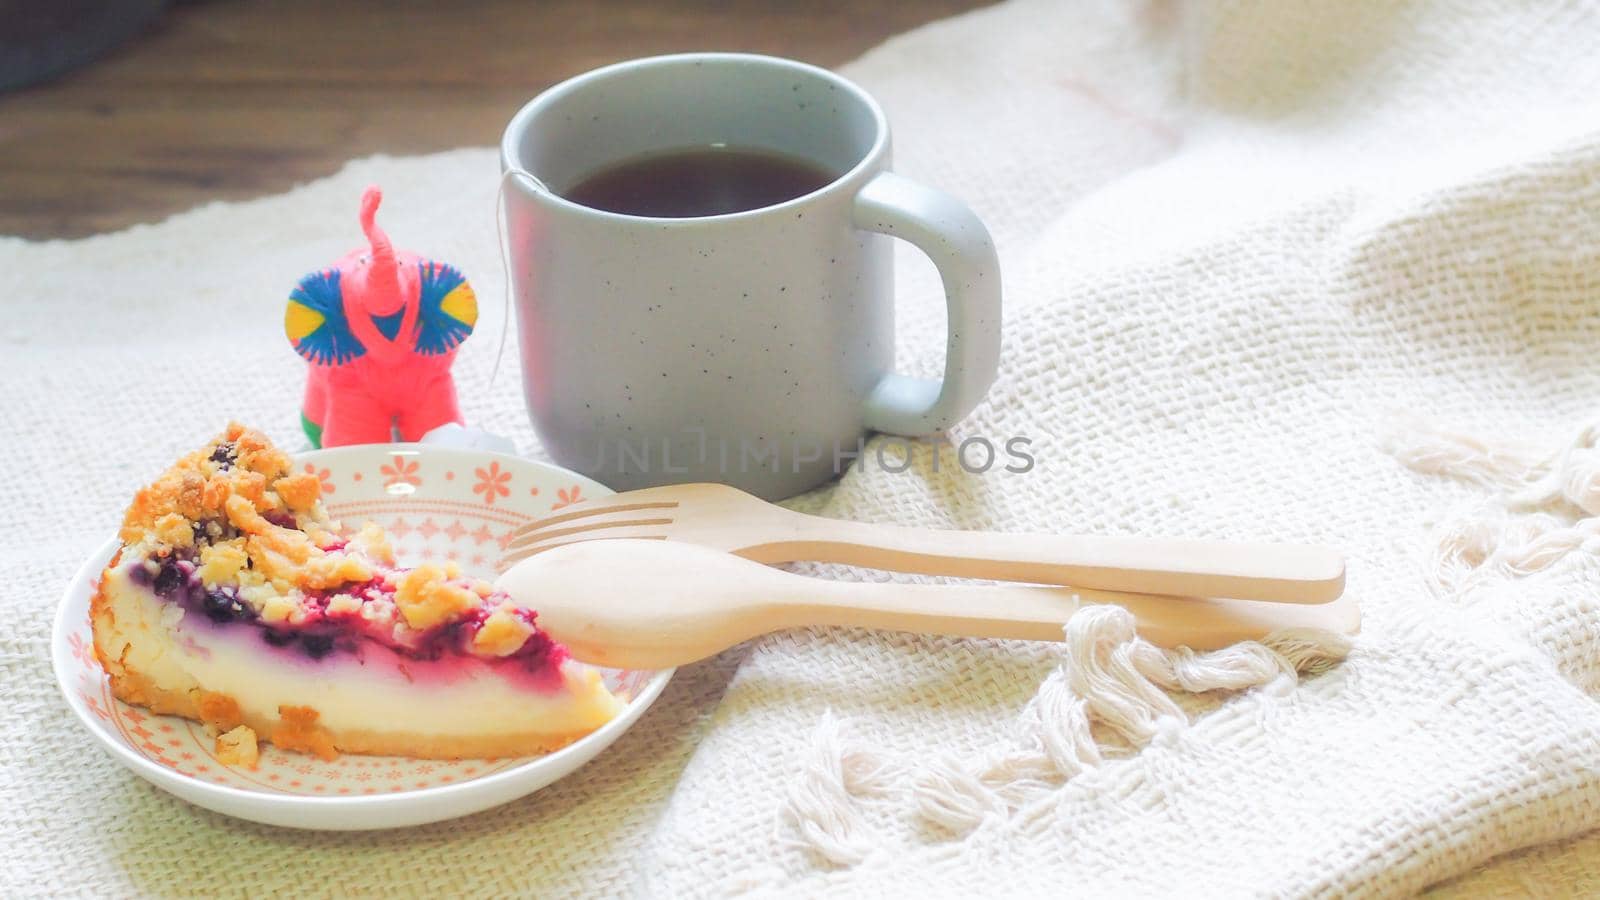 blueberry cheese cake on plate and a cup of coffee morning breakfast by Petrichor